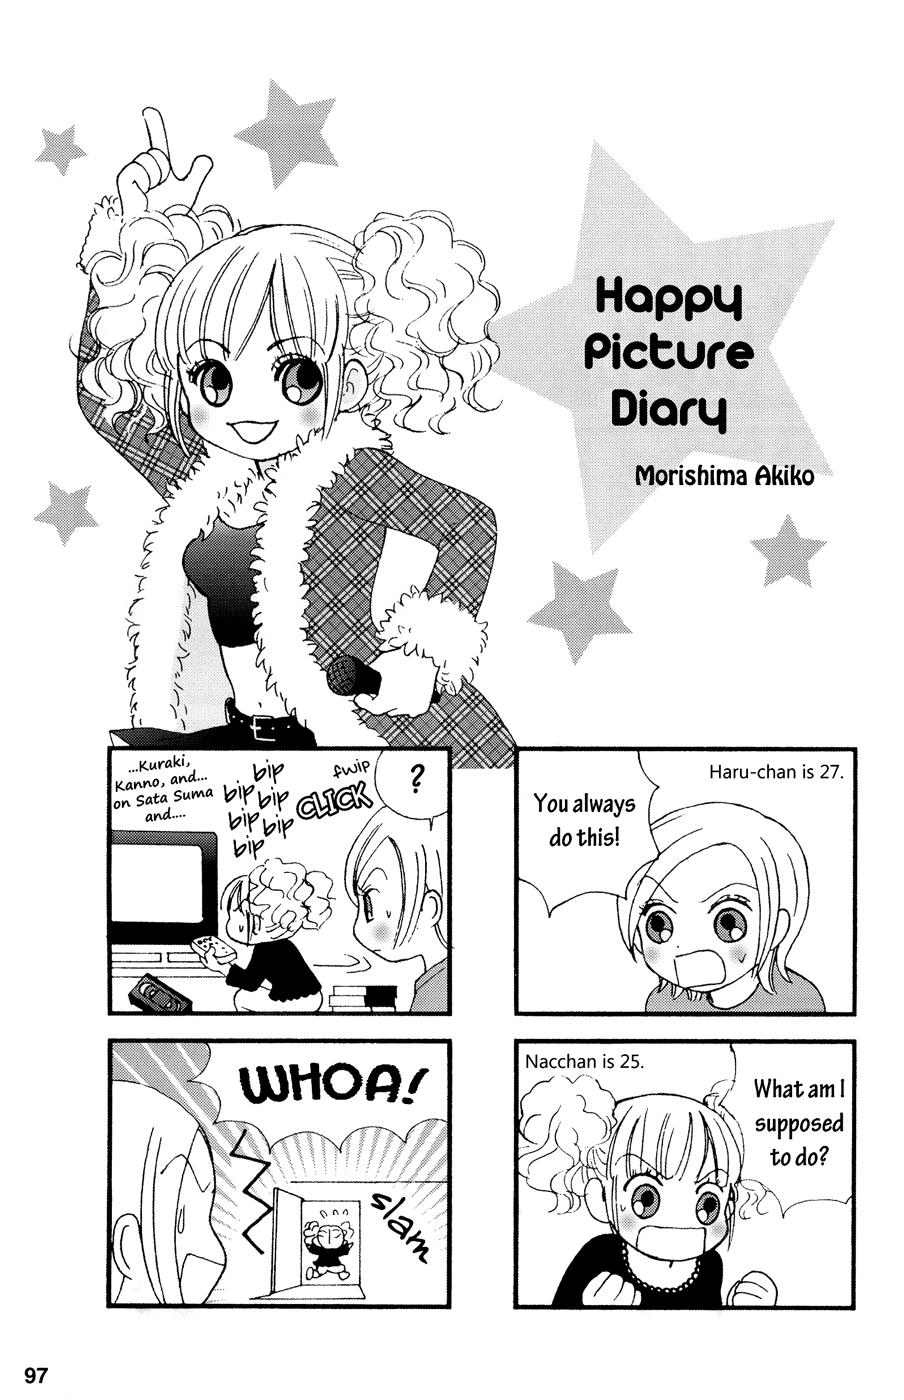 Happy Picture Diary - episode 5 - 1